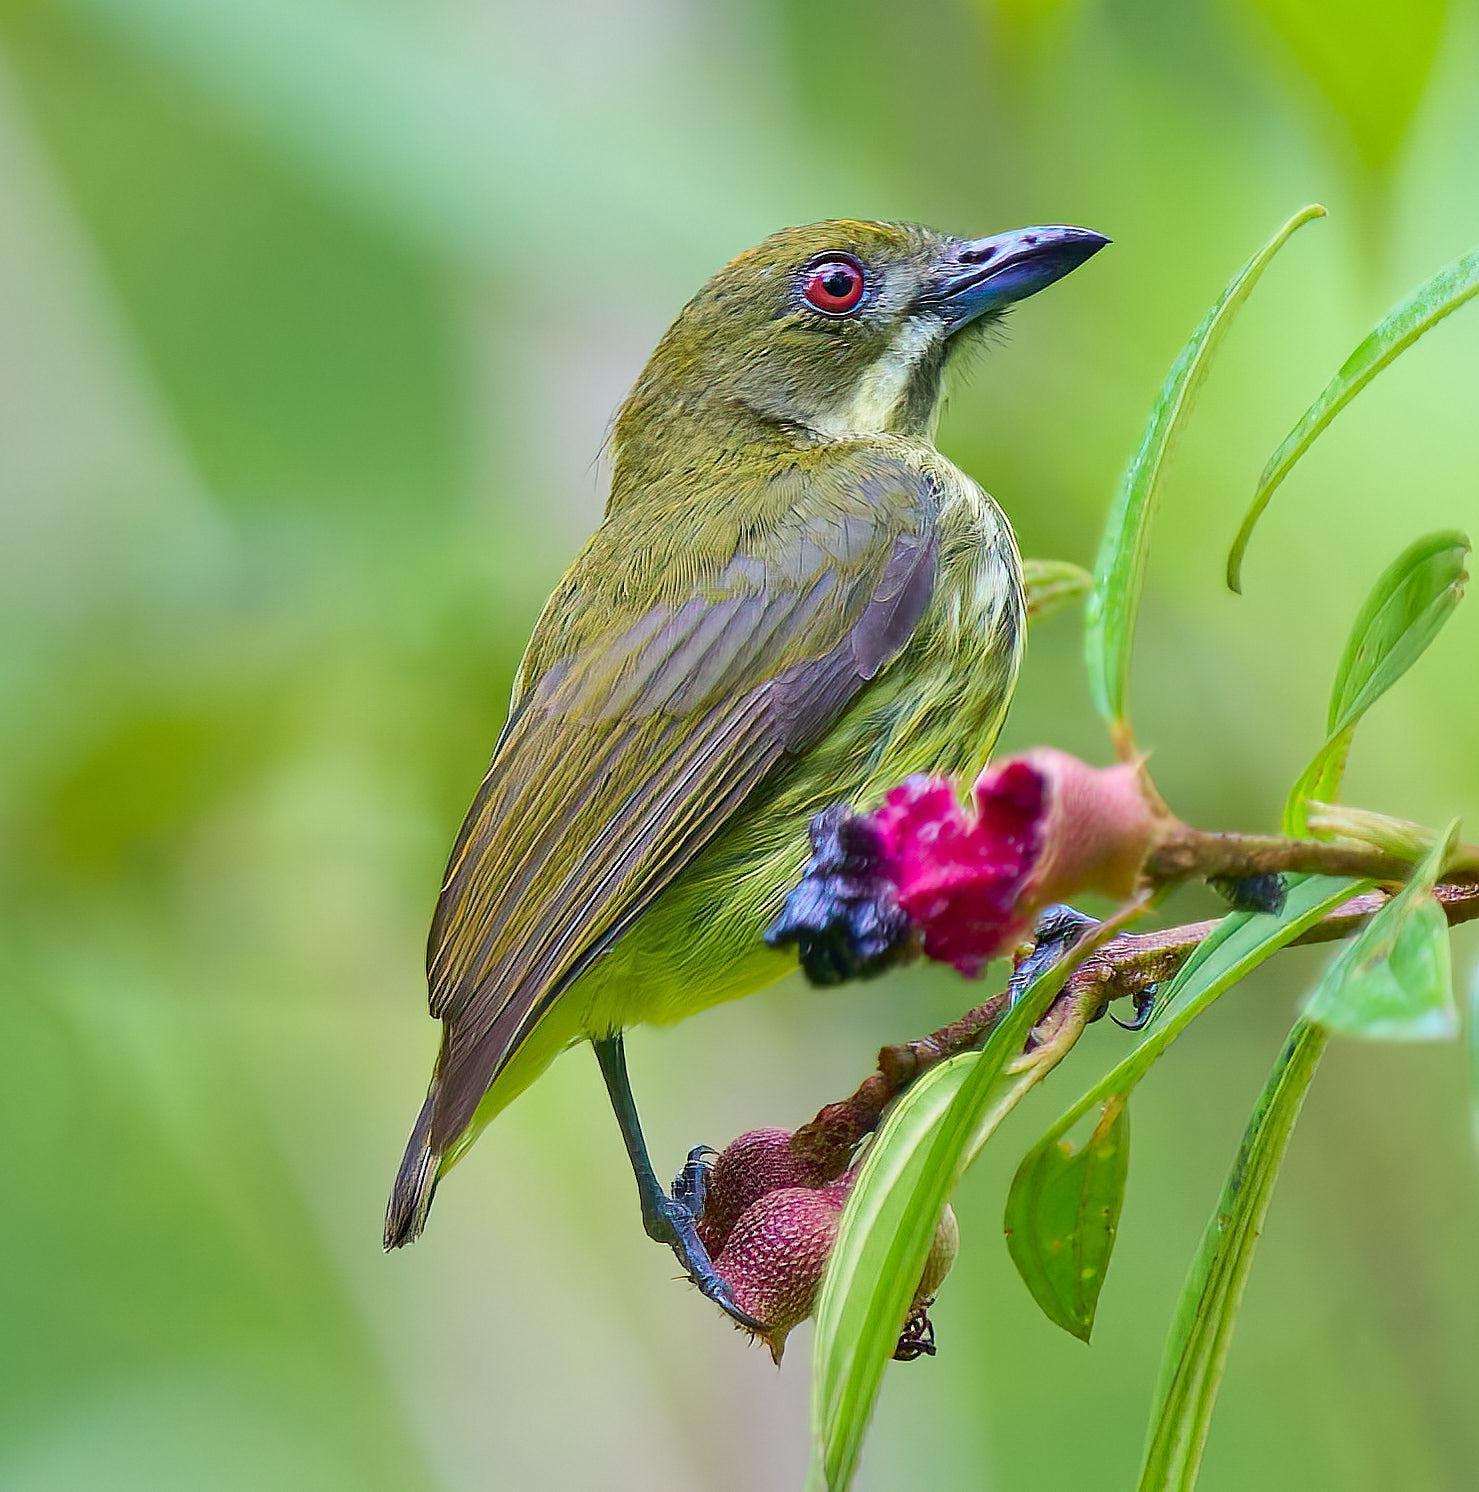 Yellow-breasted Flowerpecker Photo by Steven Cheong